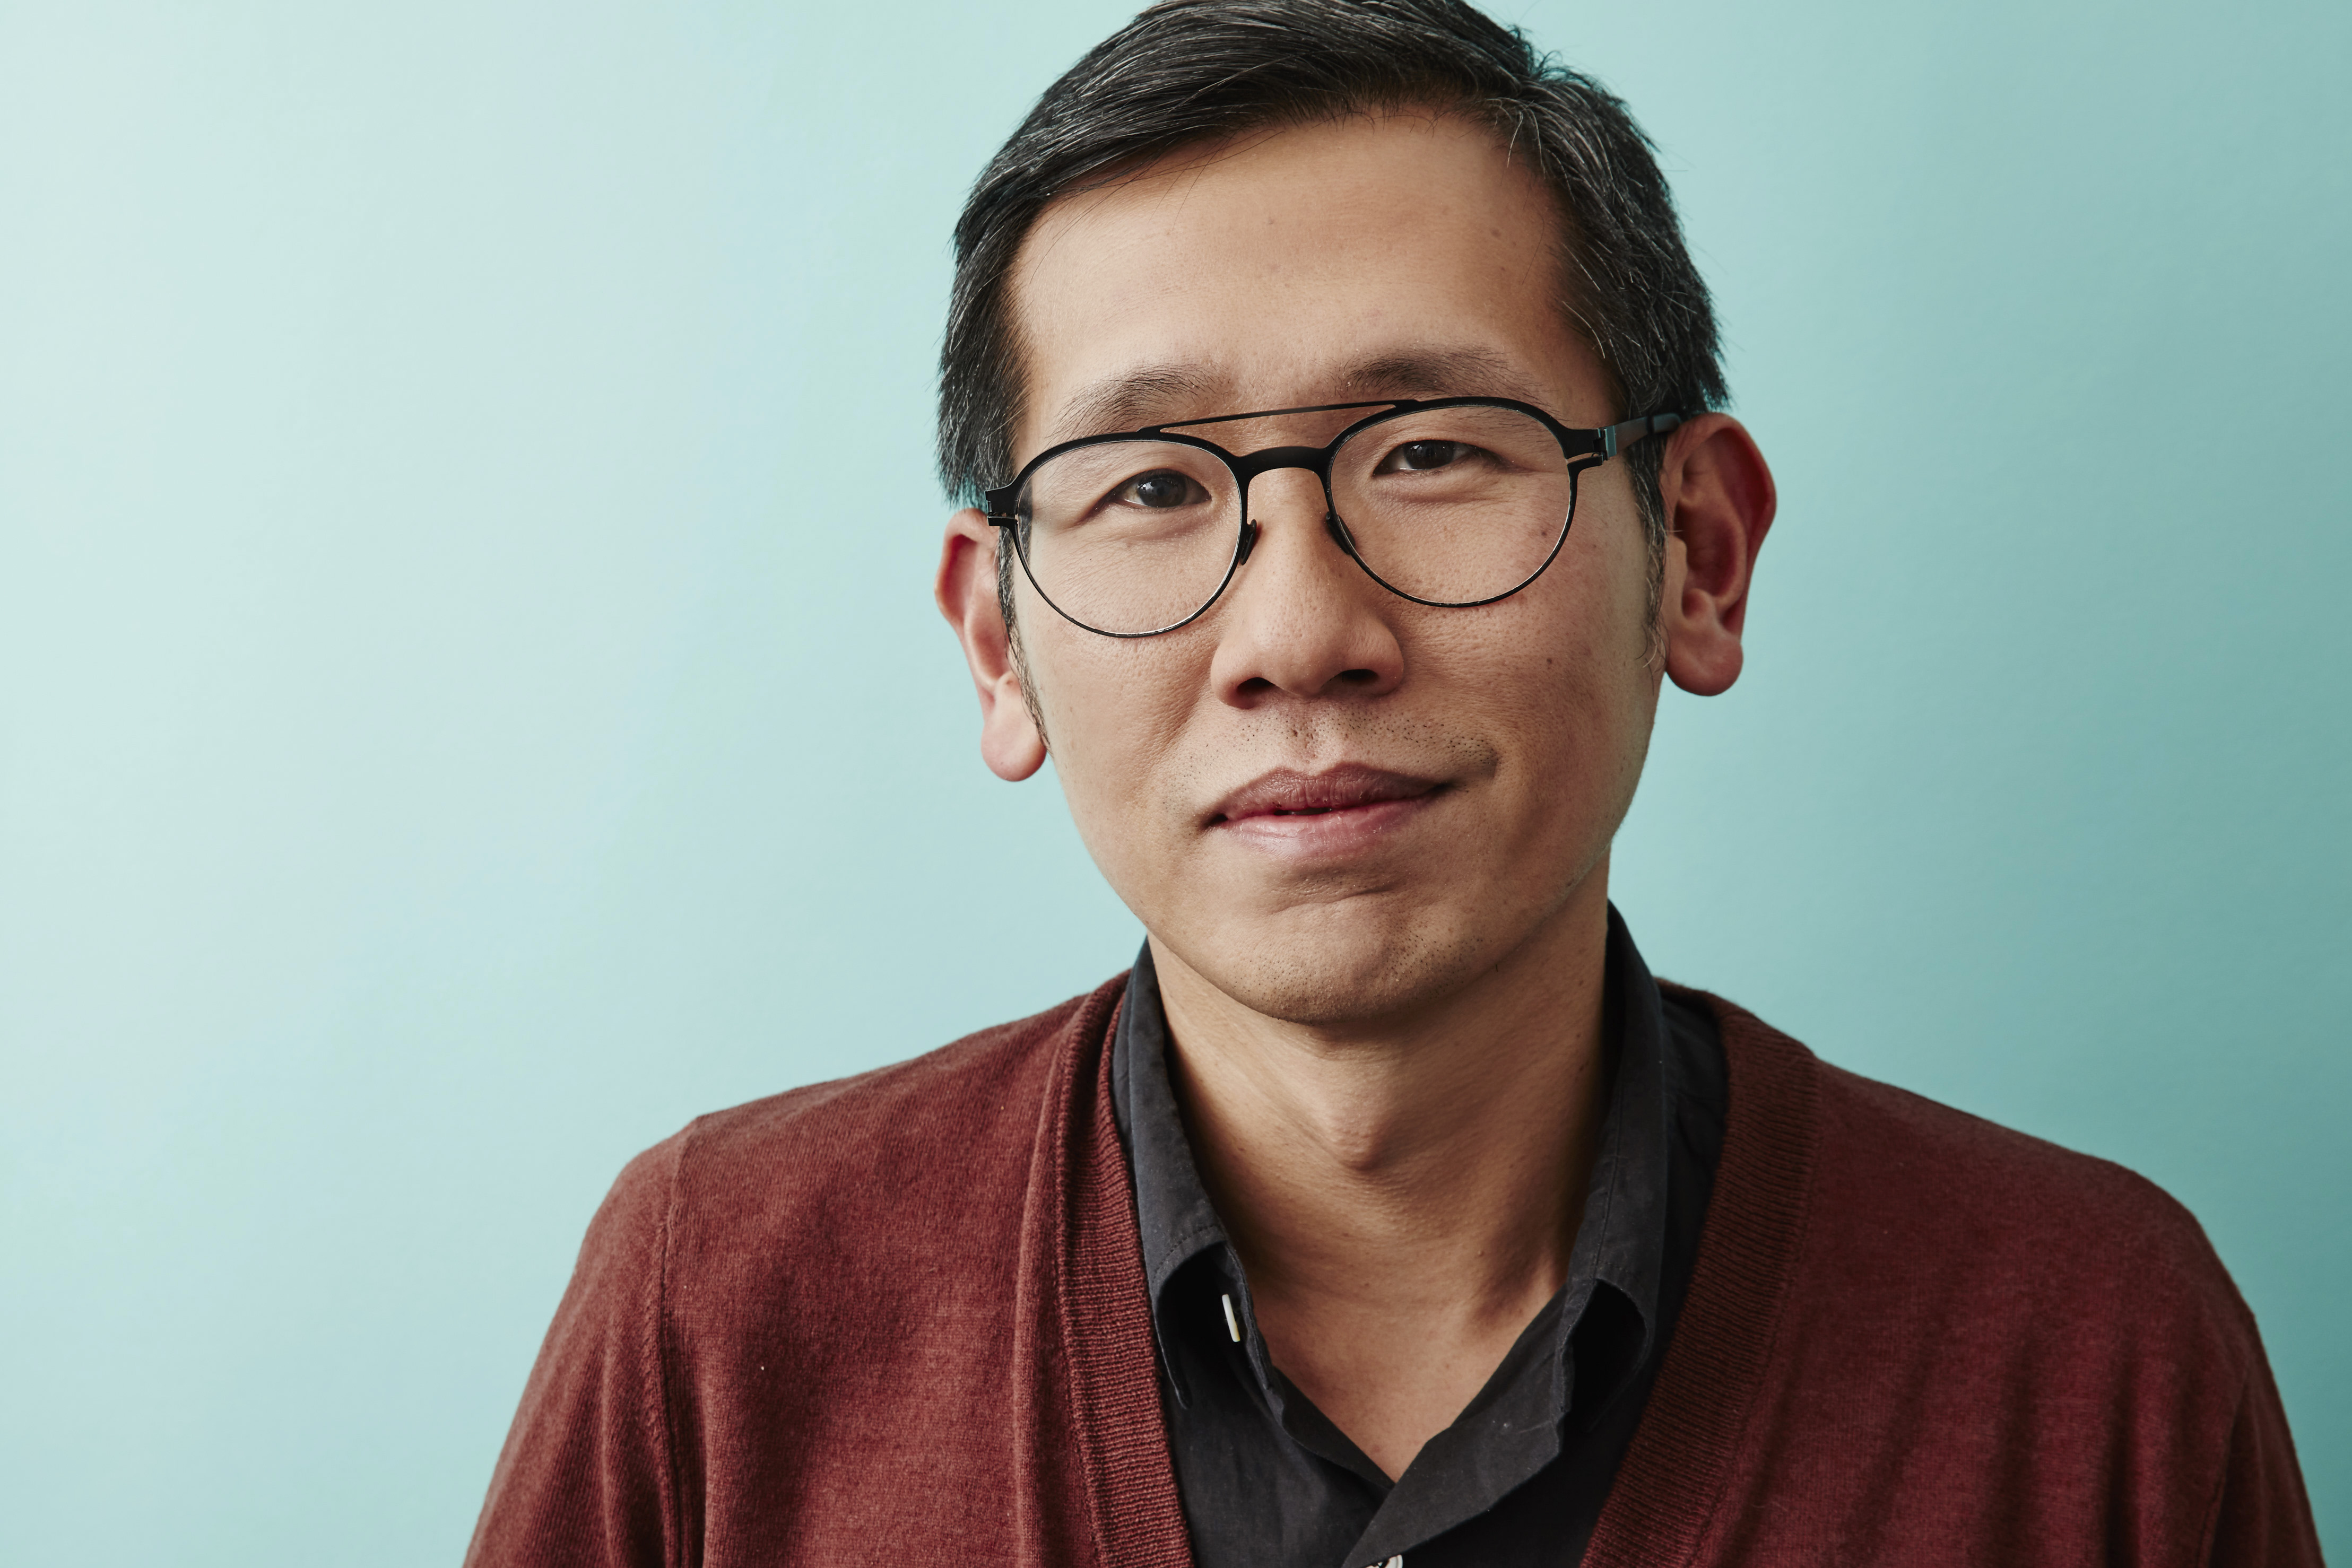 A photo of Dennis Lim, an Asian man wearing glasses and a red sweater, smiling with his mouth closed. Behind him is a robin's egg blue backdrop.